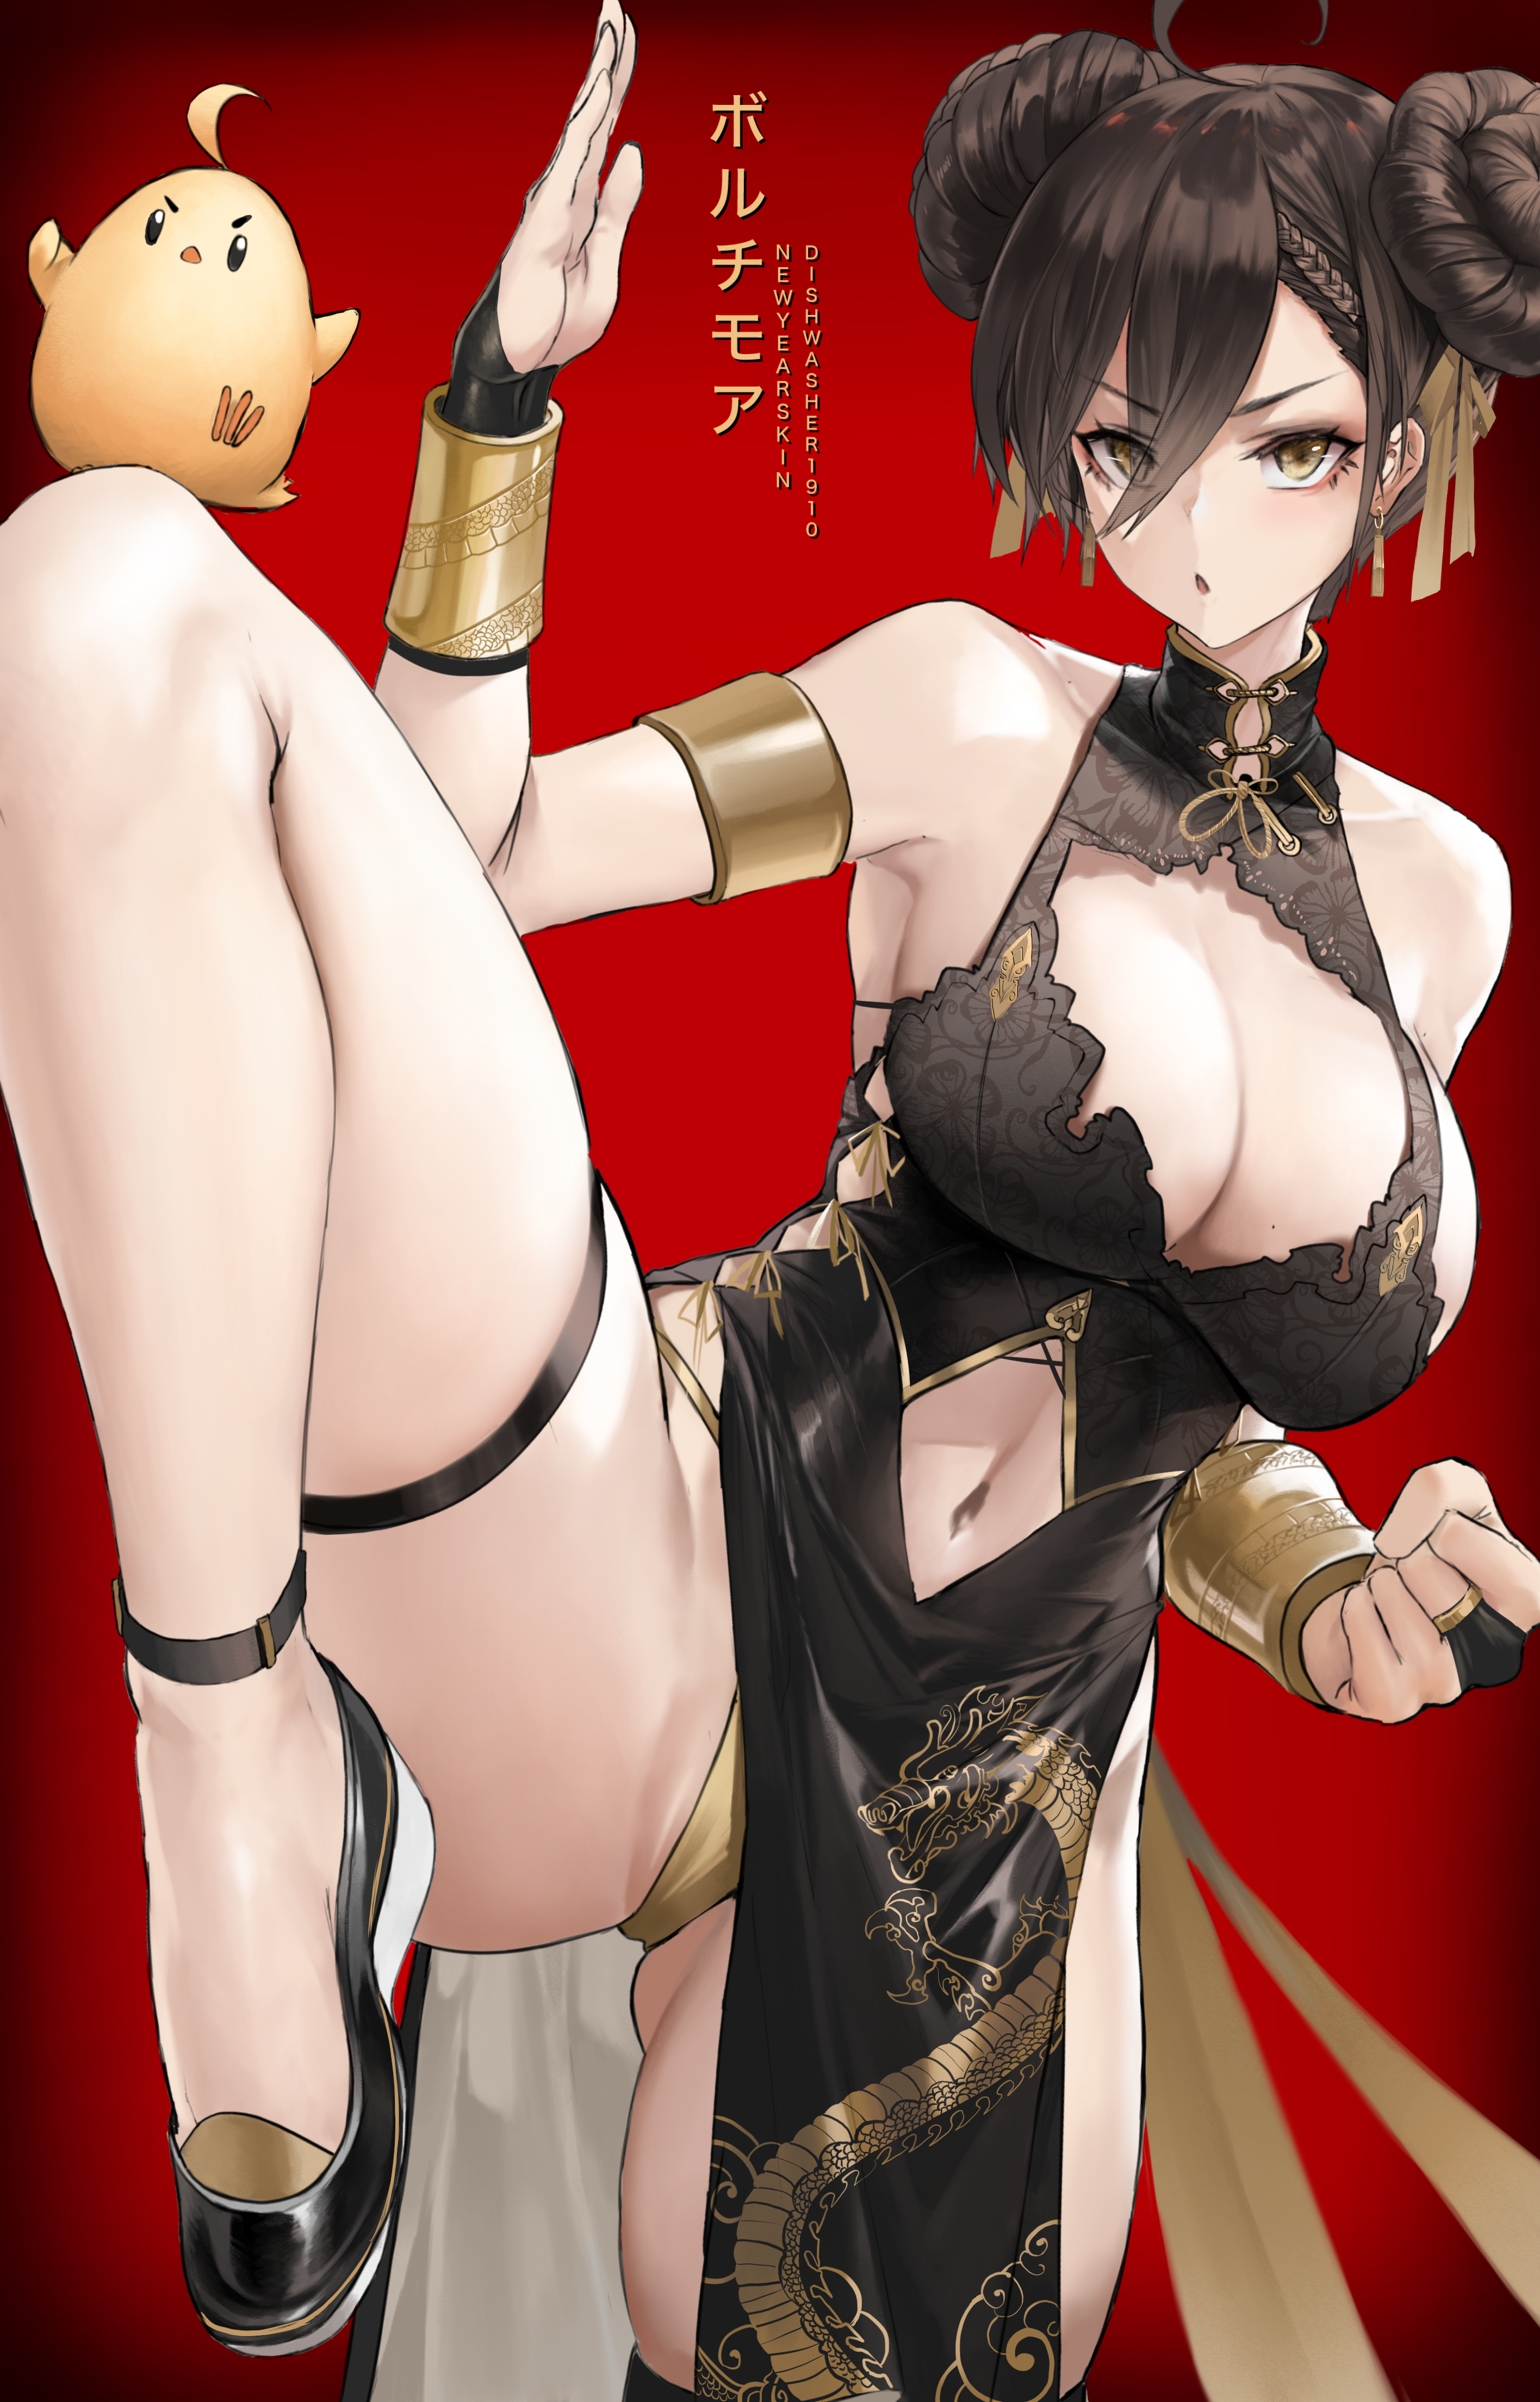 Anime 2832x4416 video games video game girls anime girls New Year brunette bangs looking at viewer kick cheongsam cleavage dress panties yellow panties thighs thick thigh thigh strap red background portrait display 2D artwork drawing illustration fan art Dishwasher1910 belly big boobs Agent (Girls Frontline) Girls Frontline